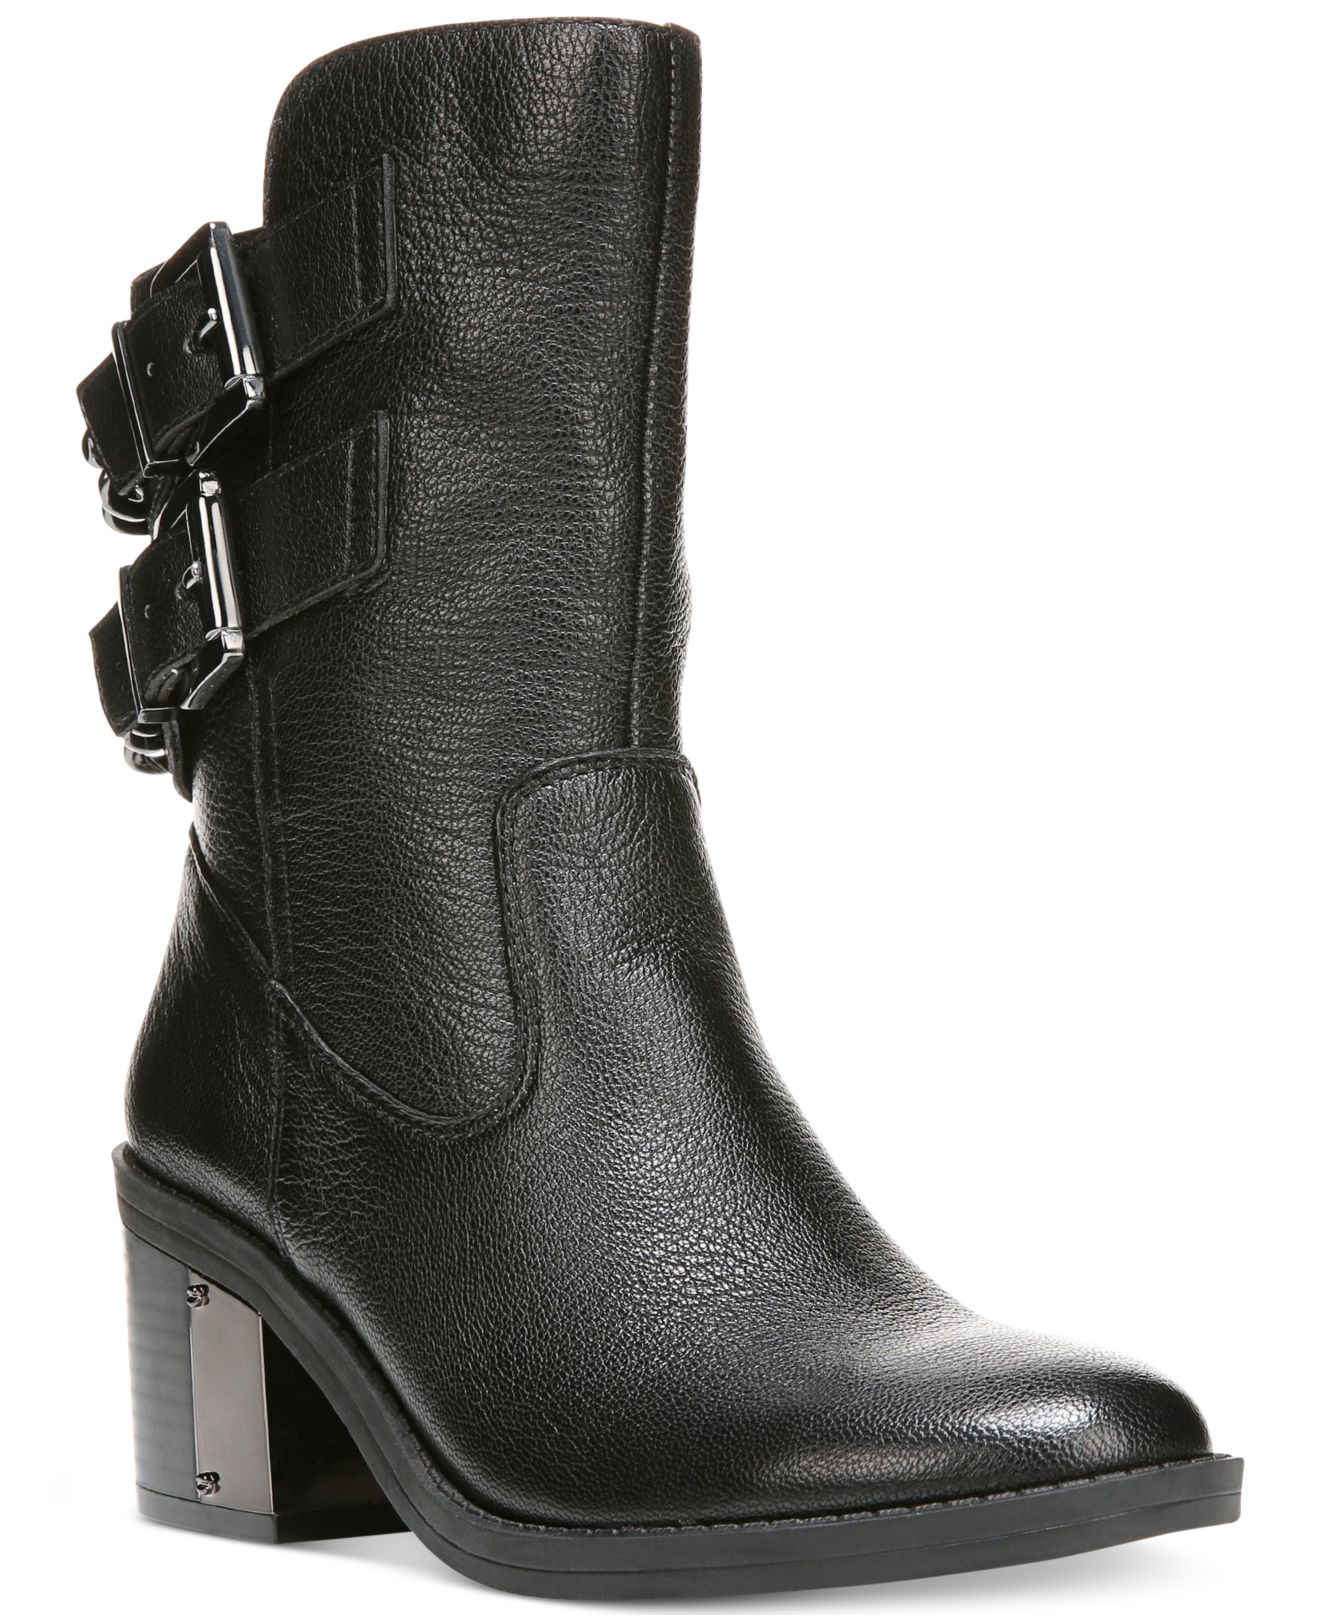 Lyst - Fergie Wistful Leather Ankle Boots in Black